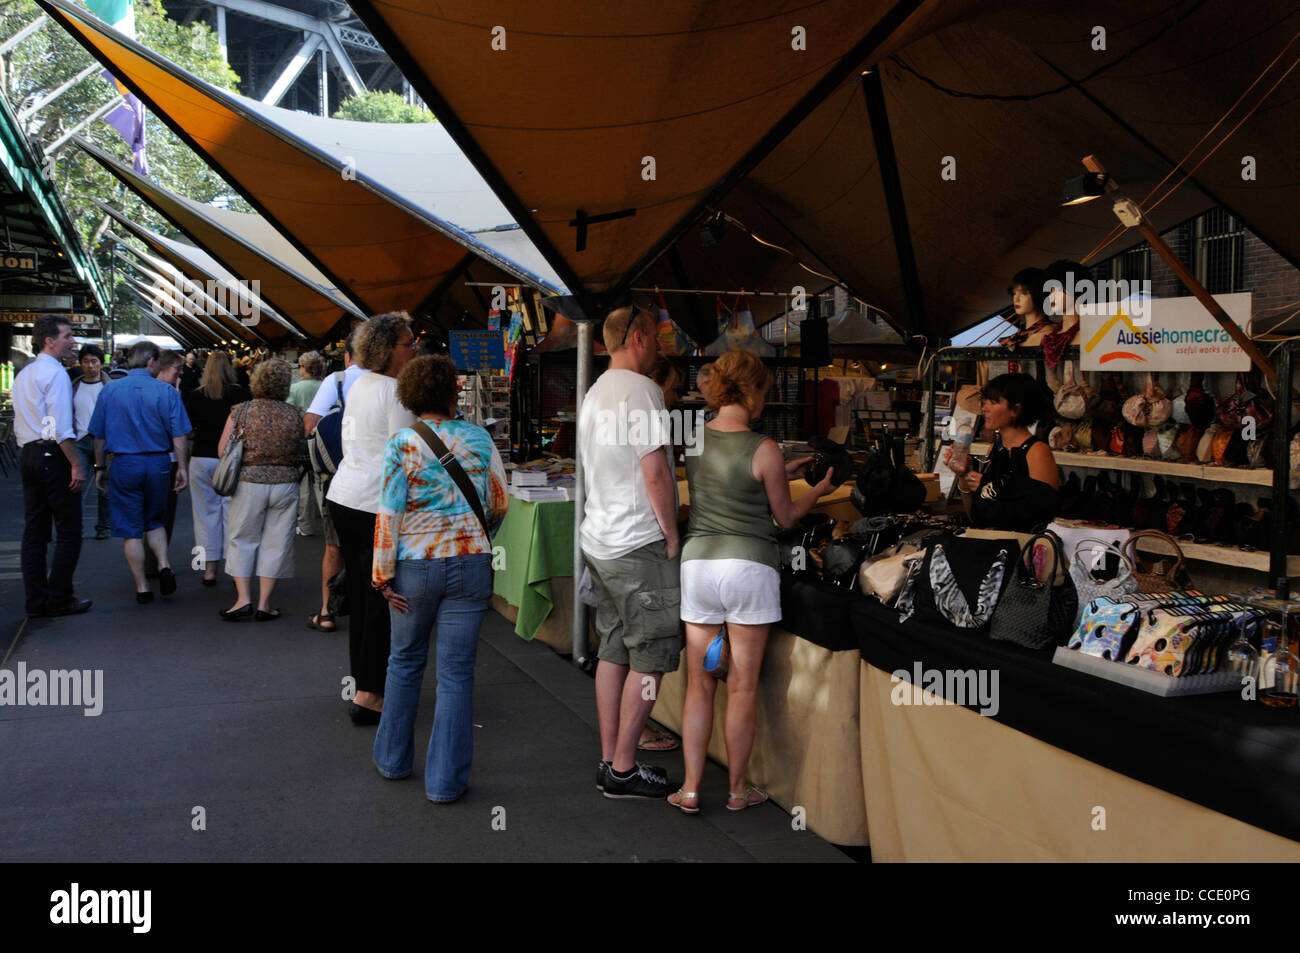 Market day at The Rocks, a historical suburb of Sydney in New South Wales, Australia. Stock Photo